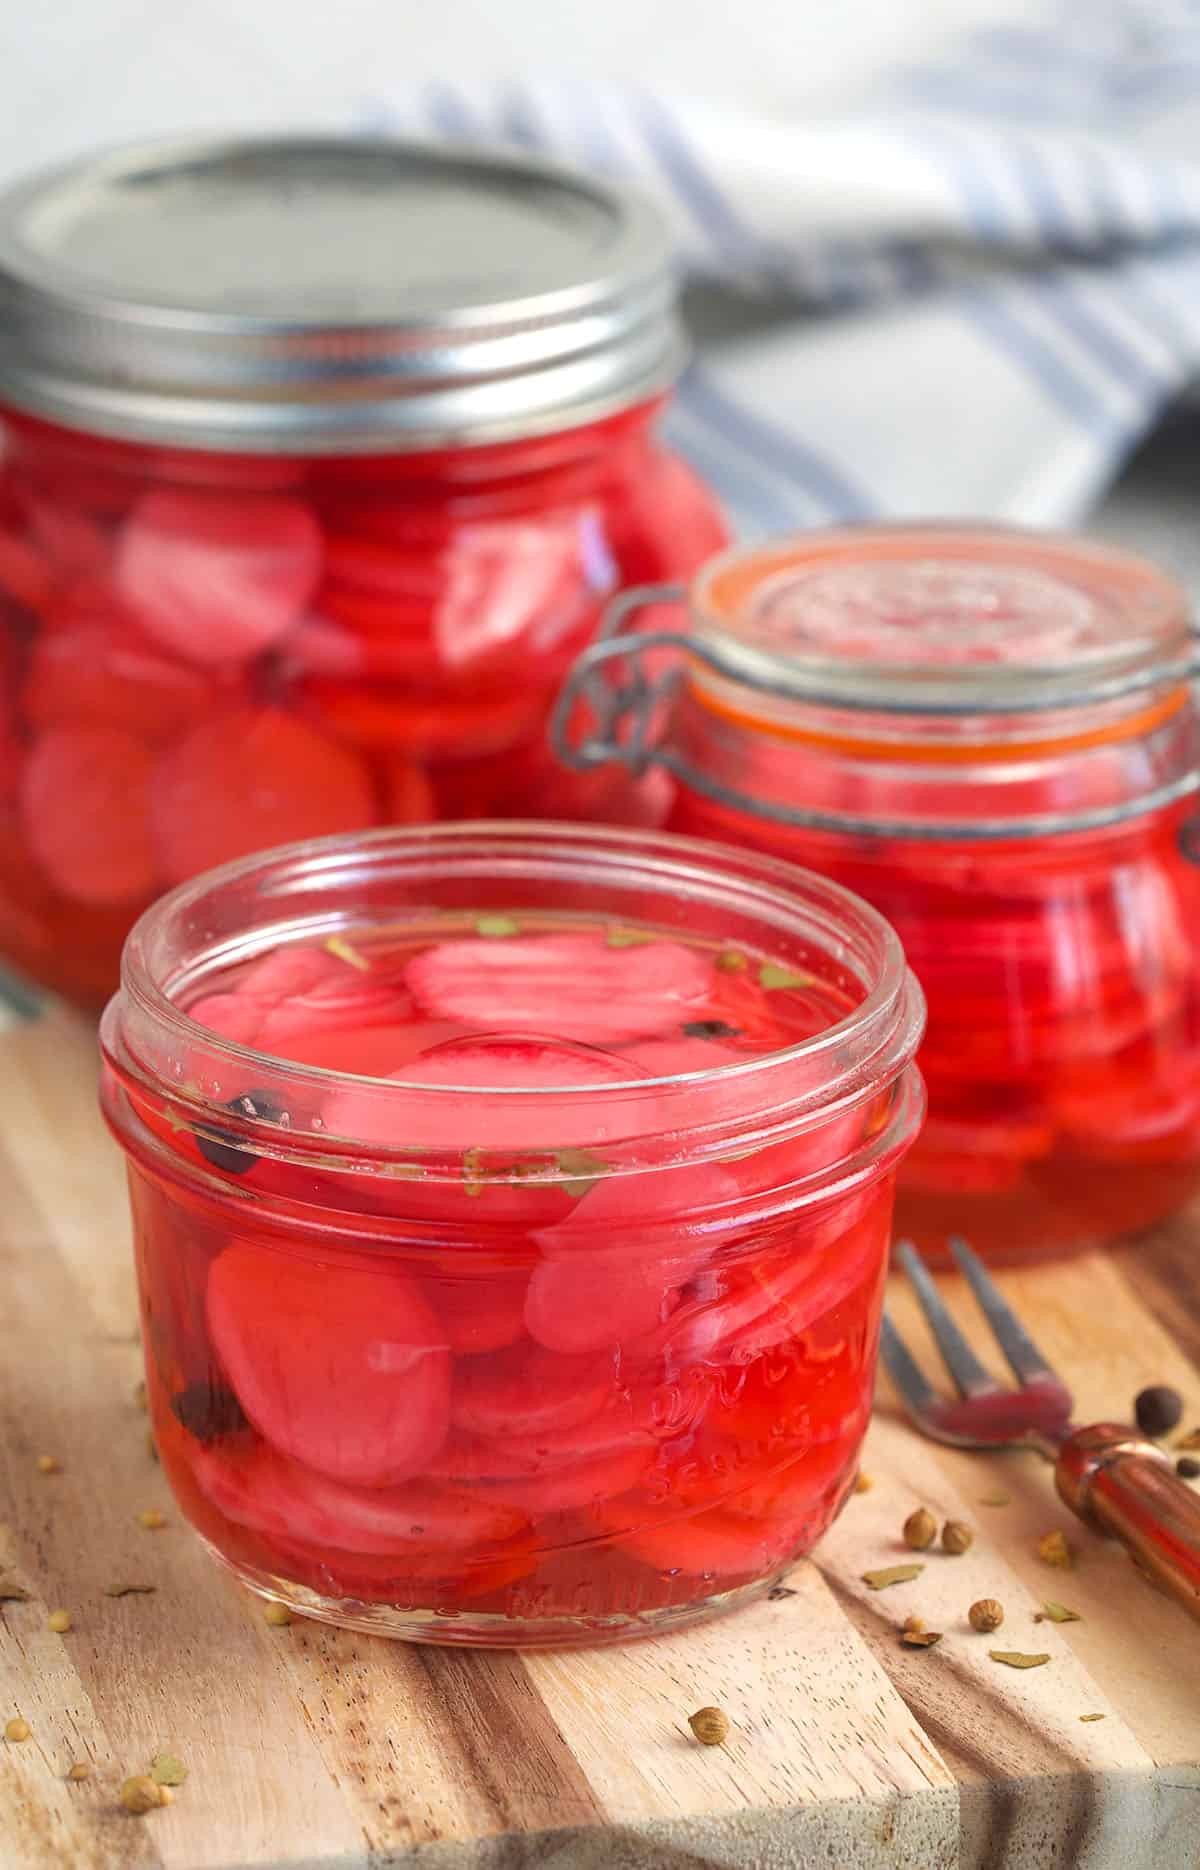 Several jars of pickled radishes are placed on a wooden surface. 